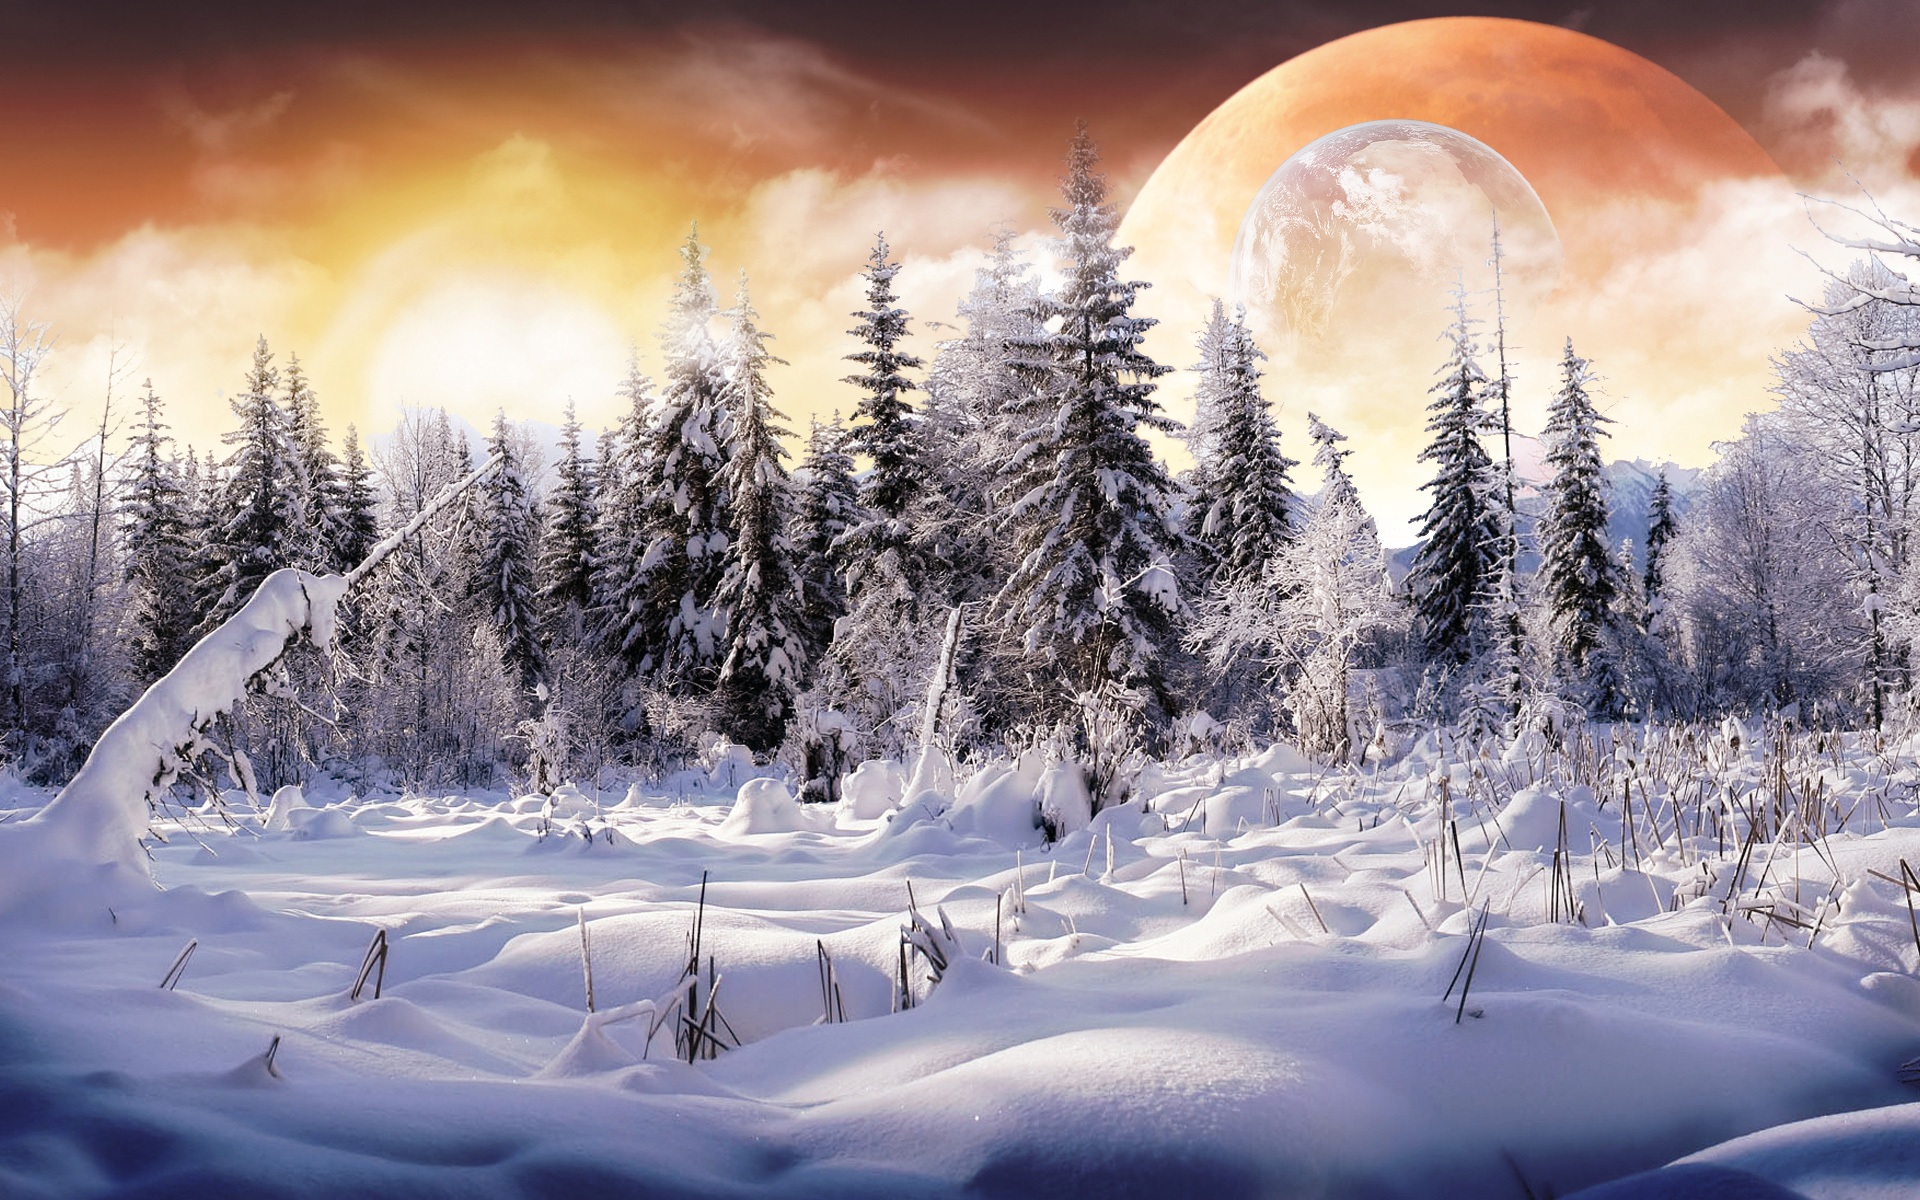 Snow-covered planet in high definition desktop wallpaper.